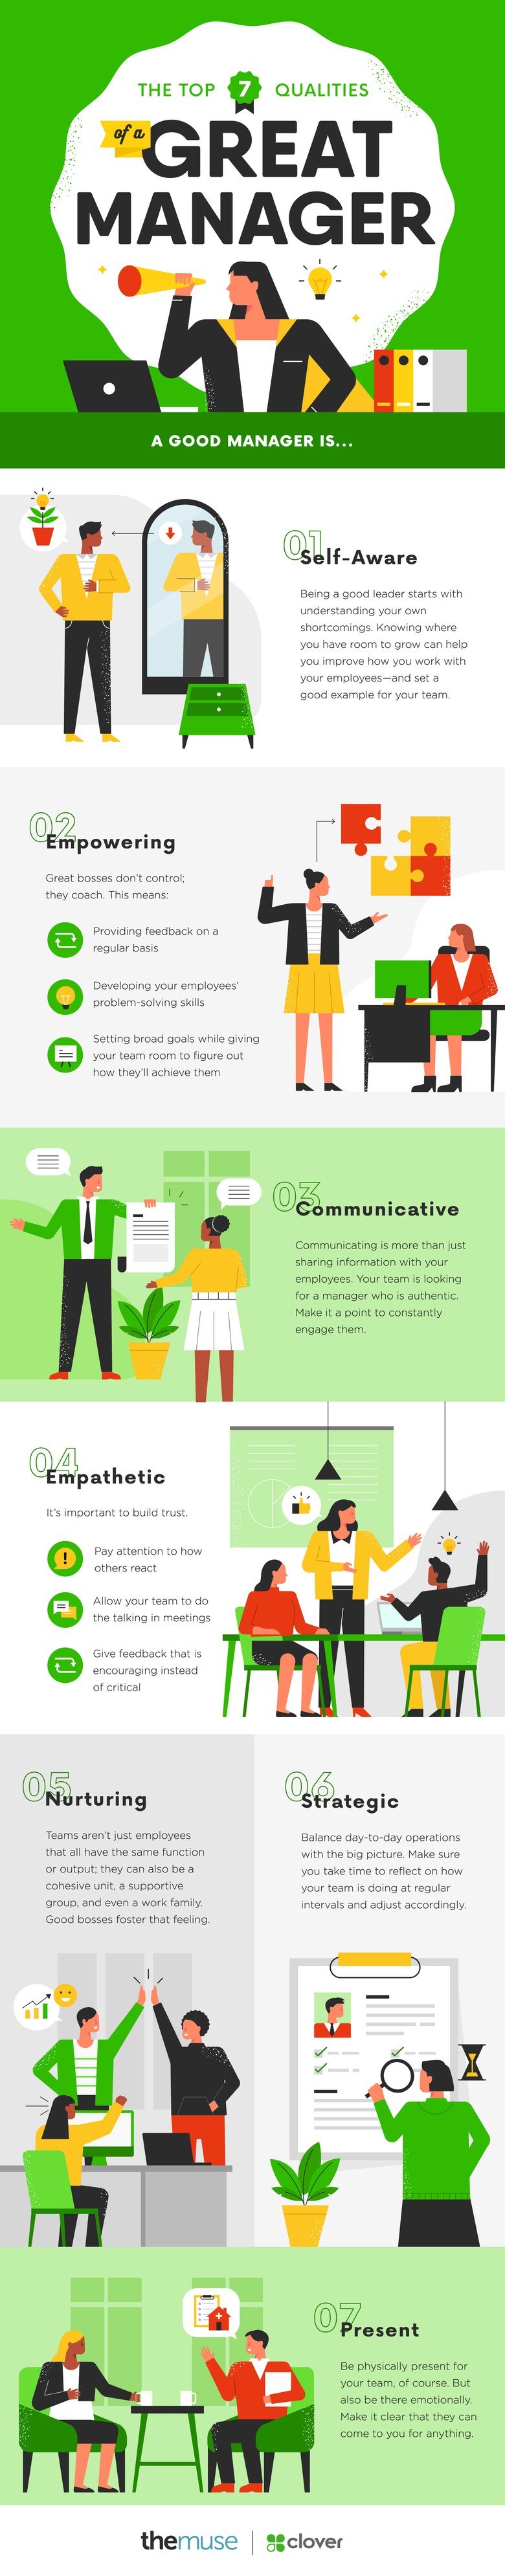 infographic illustrating qualities of a good manager